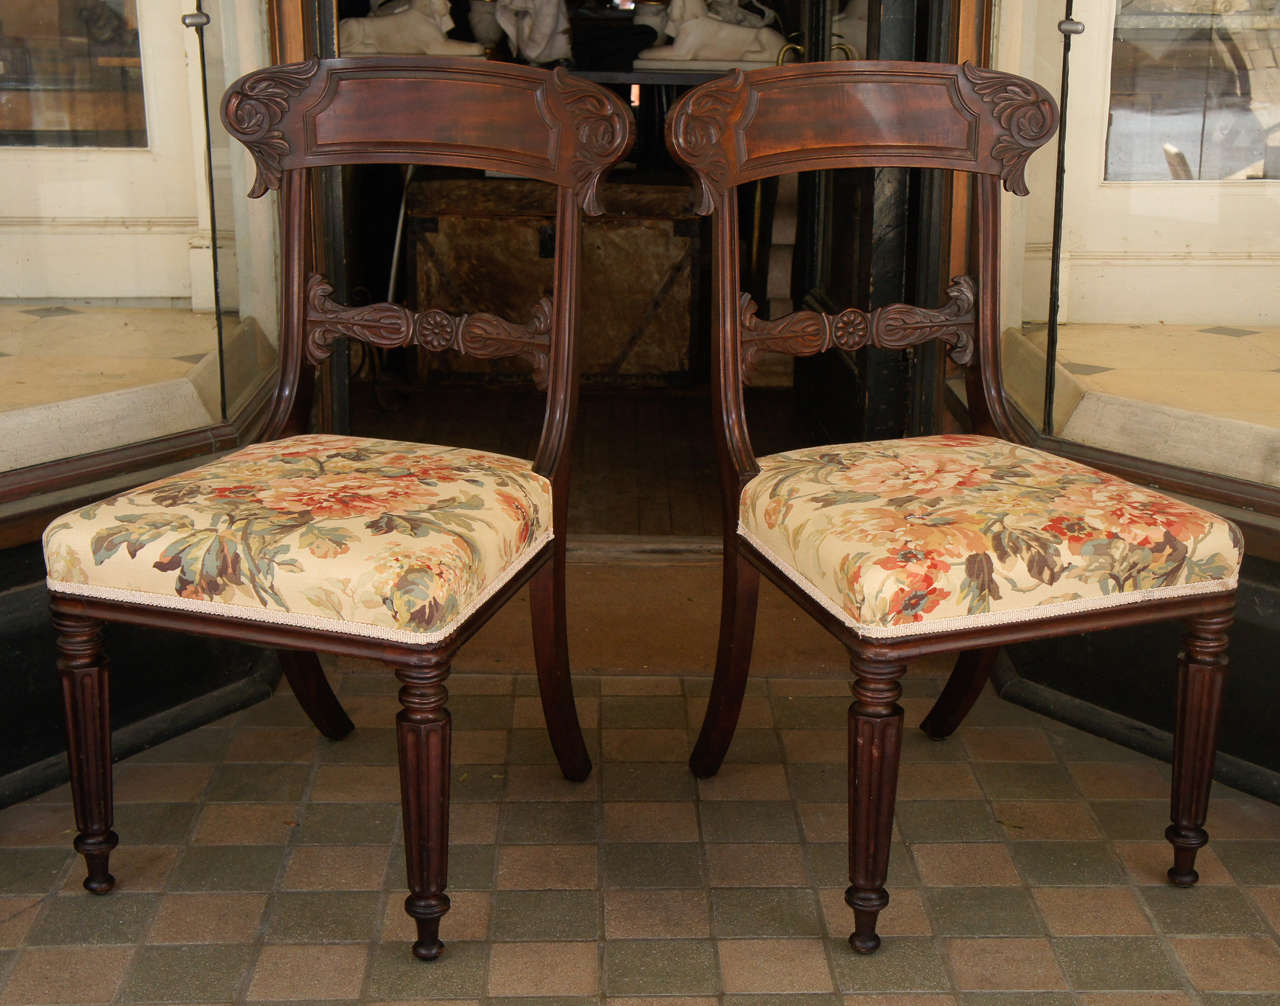 This fine pair of chairs from England  made during the William IV period show all the period's major style influences. The classical klismos profile if greatly enhanced by the carving which is cut from the solid. The crest rails tablet is enlivened